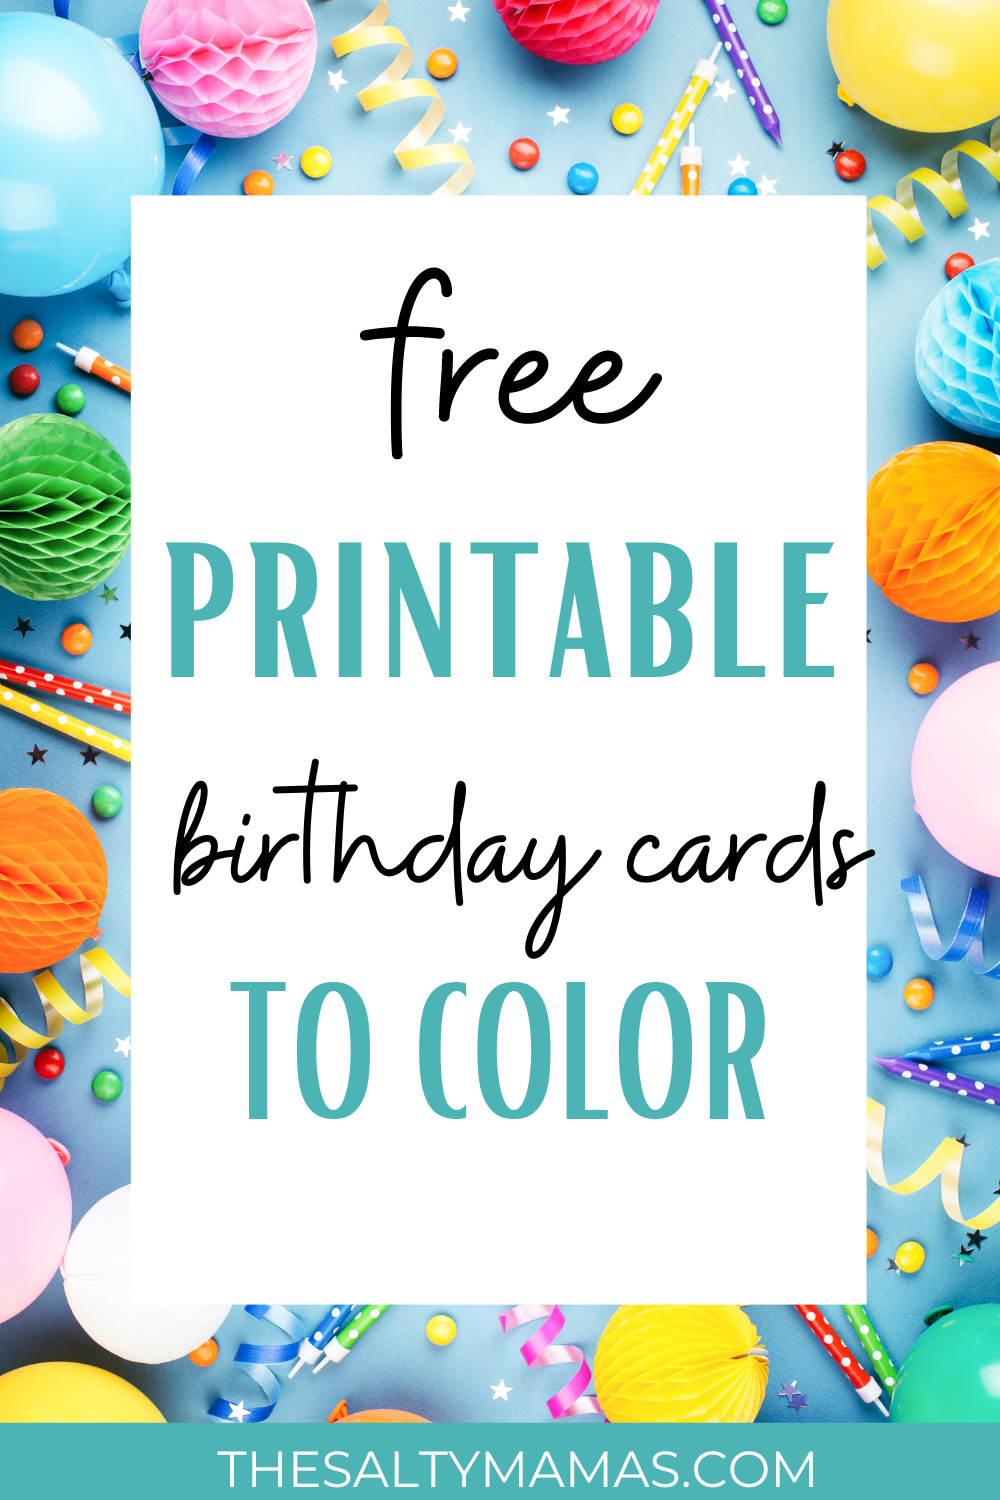 Free Printable Birthday Cards For Kids To Color The Salty Mamas - Free Printable Birthday Cards For Kids